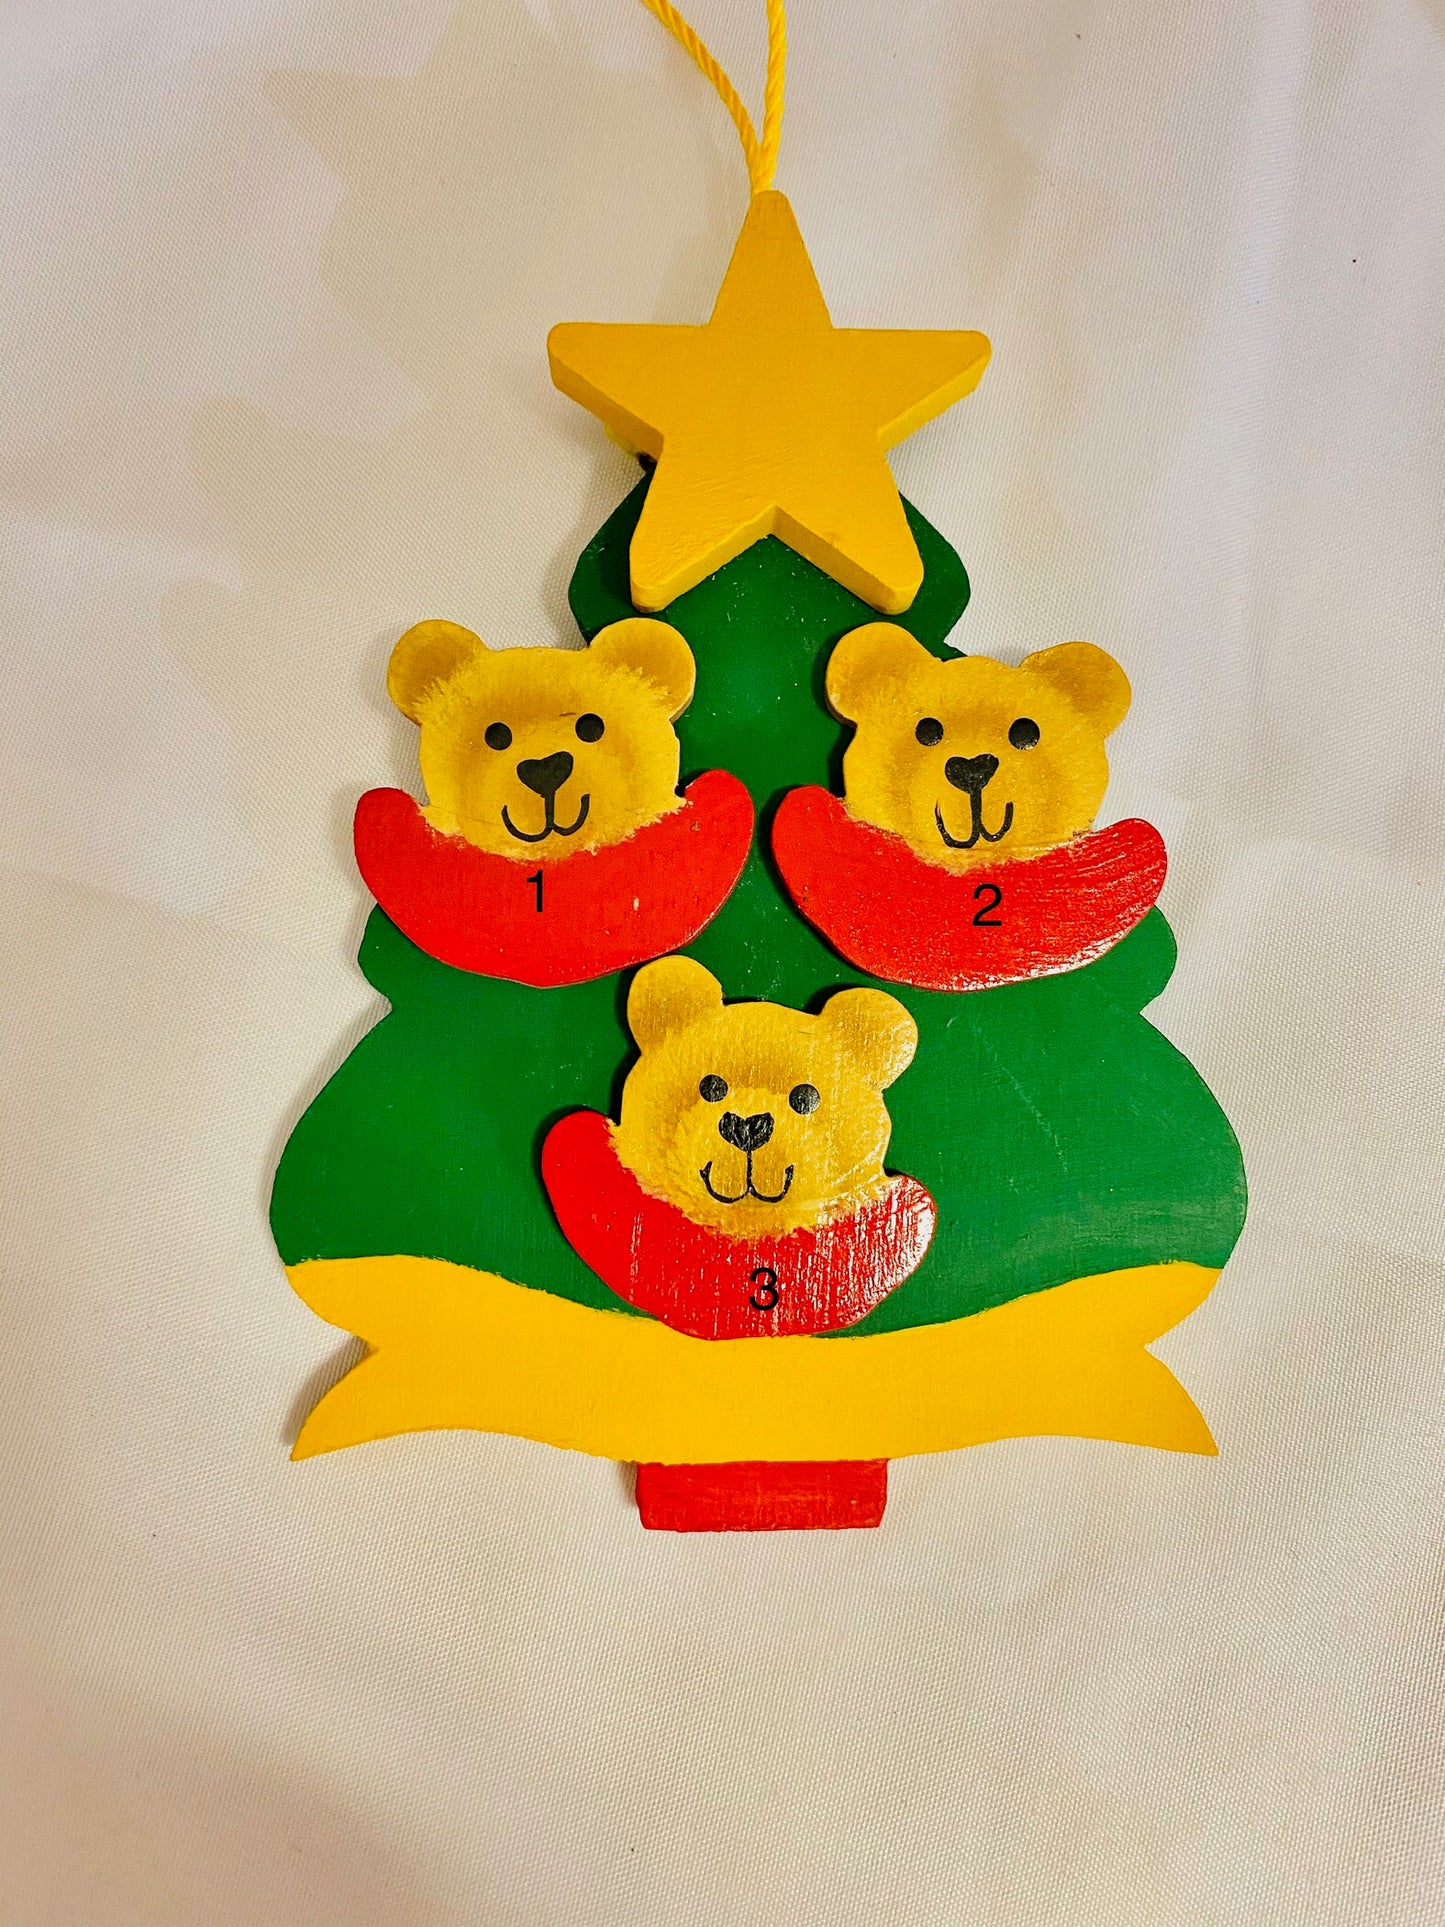 Personalized Ornament 3 Bear Faces on a Christmas Tree  4.5" x 3.5"